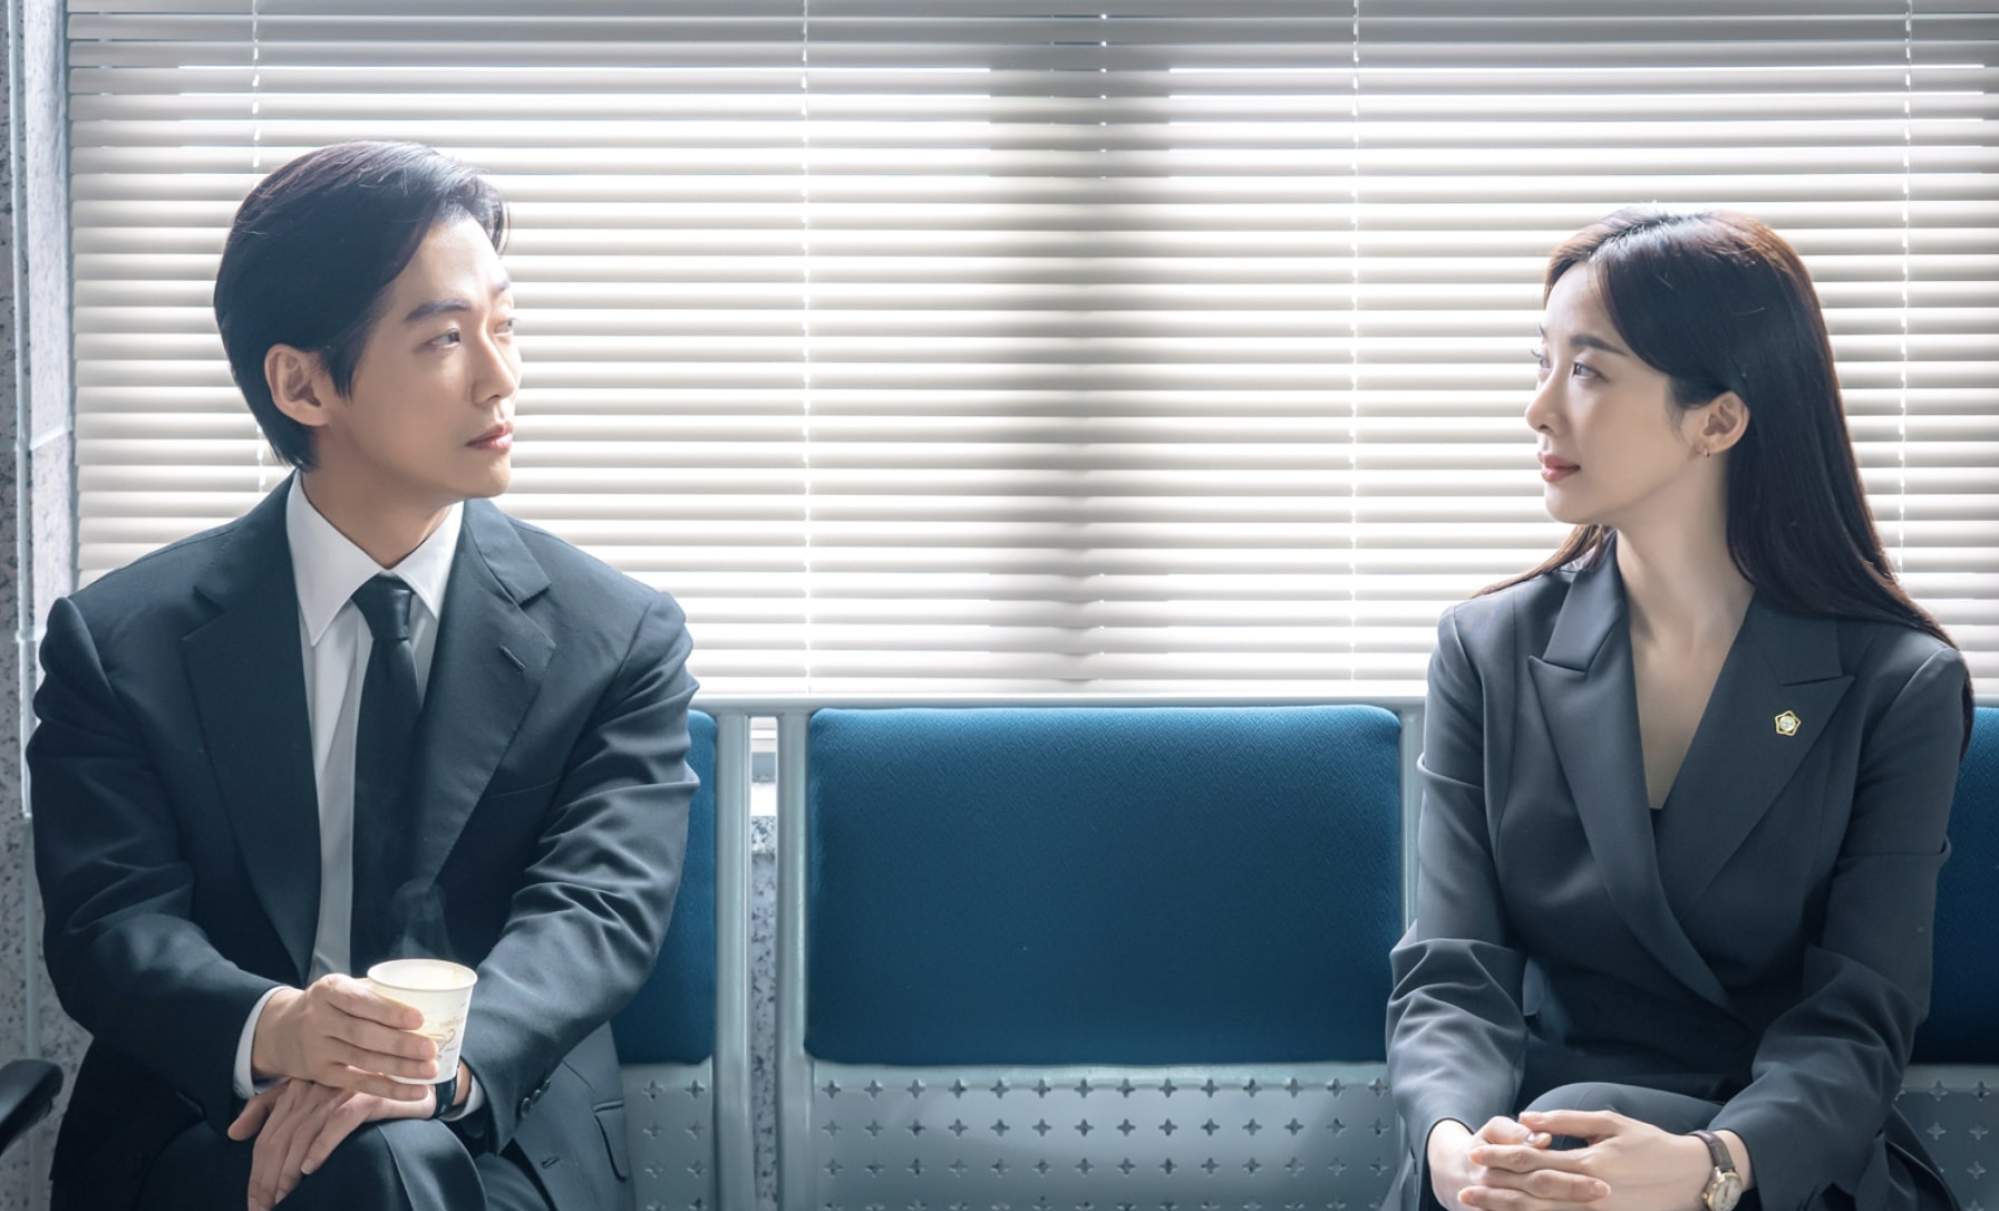 K Drama Review One Dollar Lawyer Disney Series Starring Namgoong Min Elevates Legal Tropes 1407